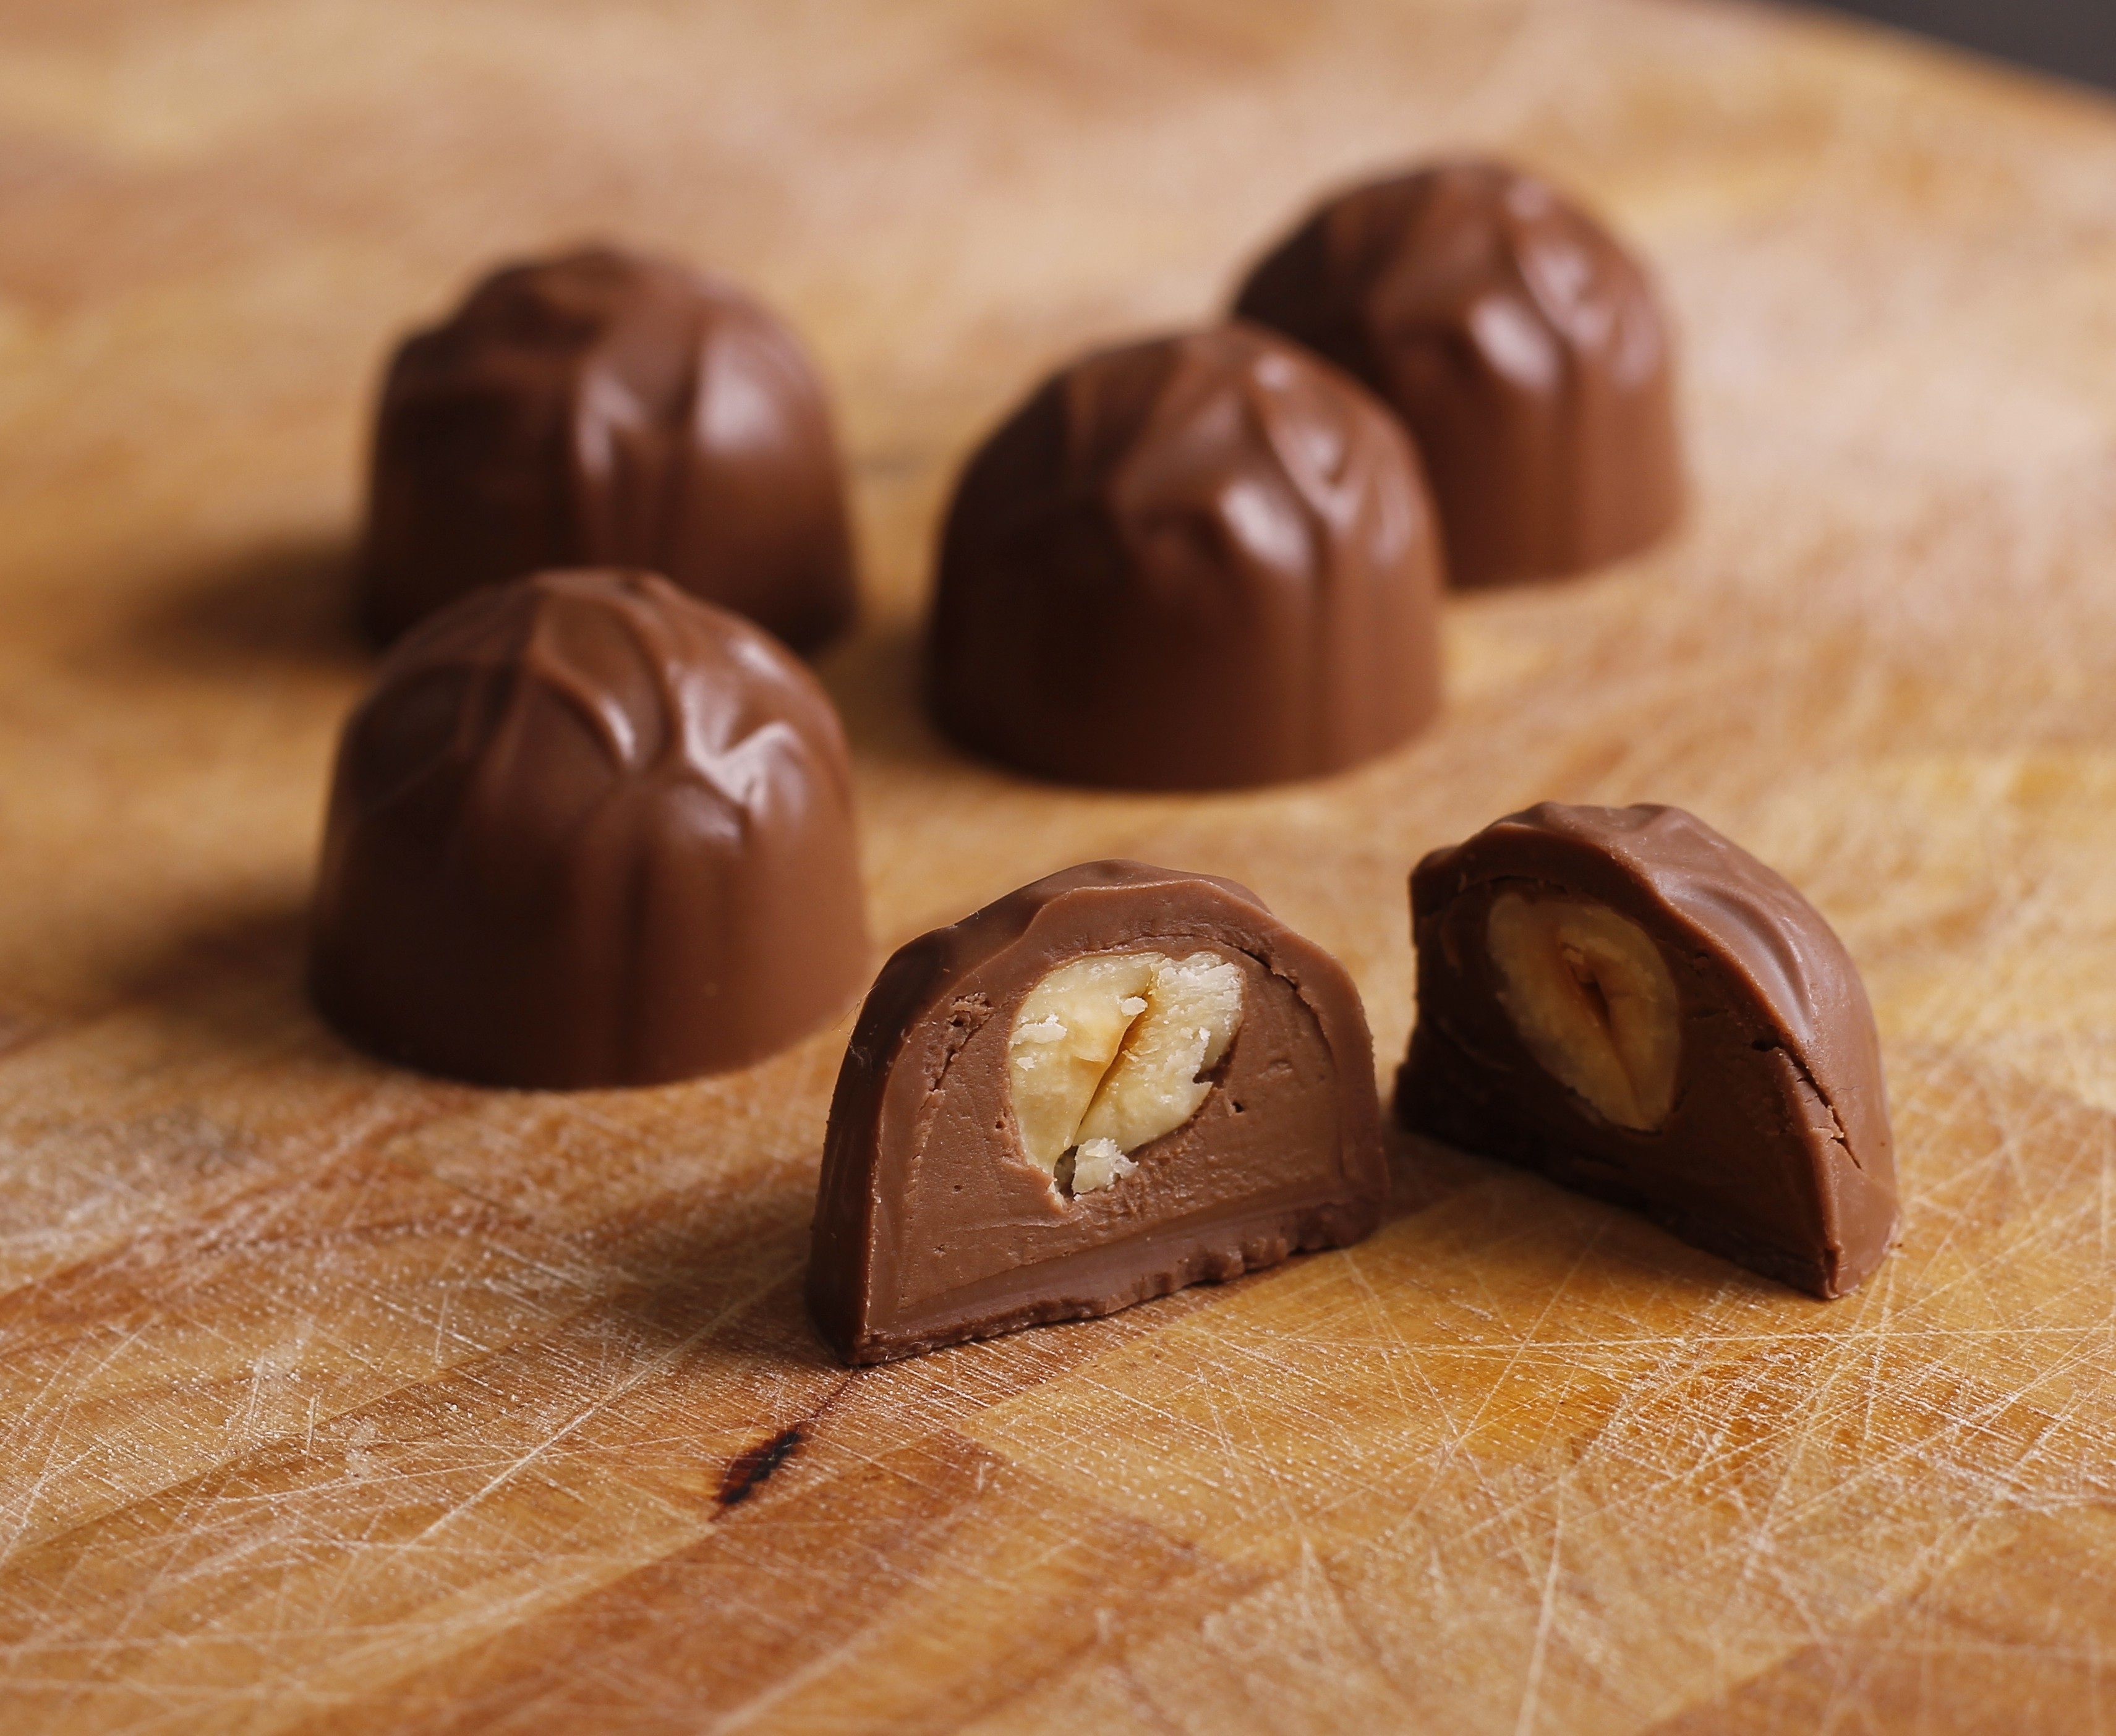 Chocolates with nuts: a mix of flavours and textures